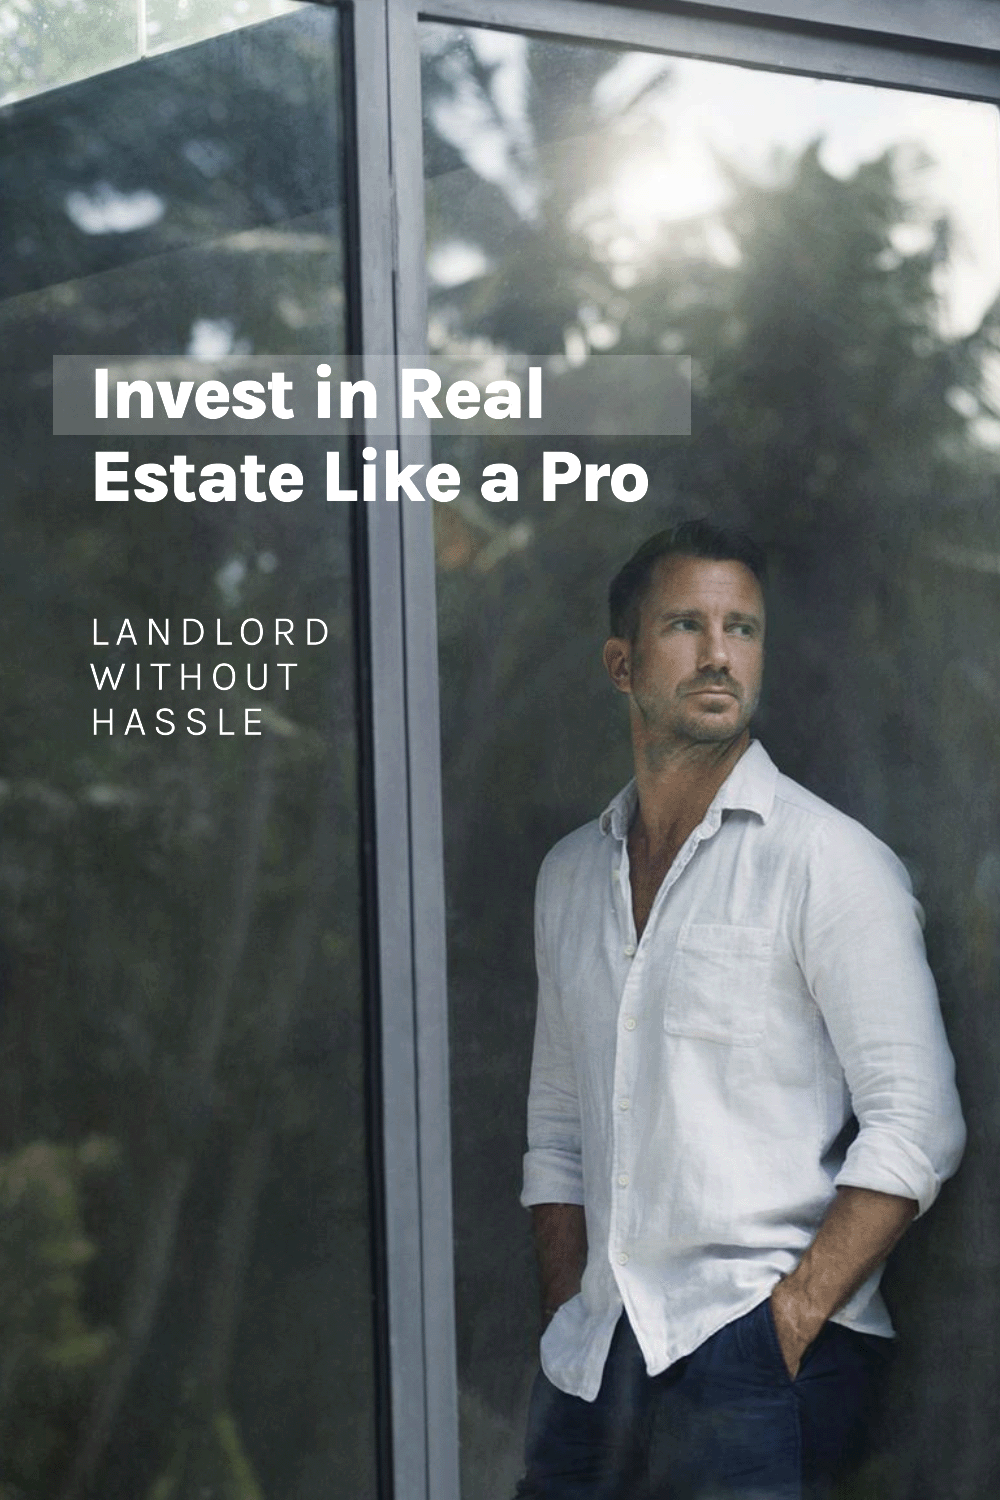 Landlord without hassle: Invest in Real Estate like a Pro